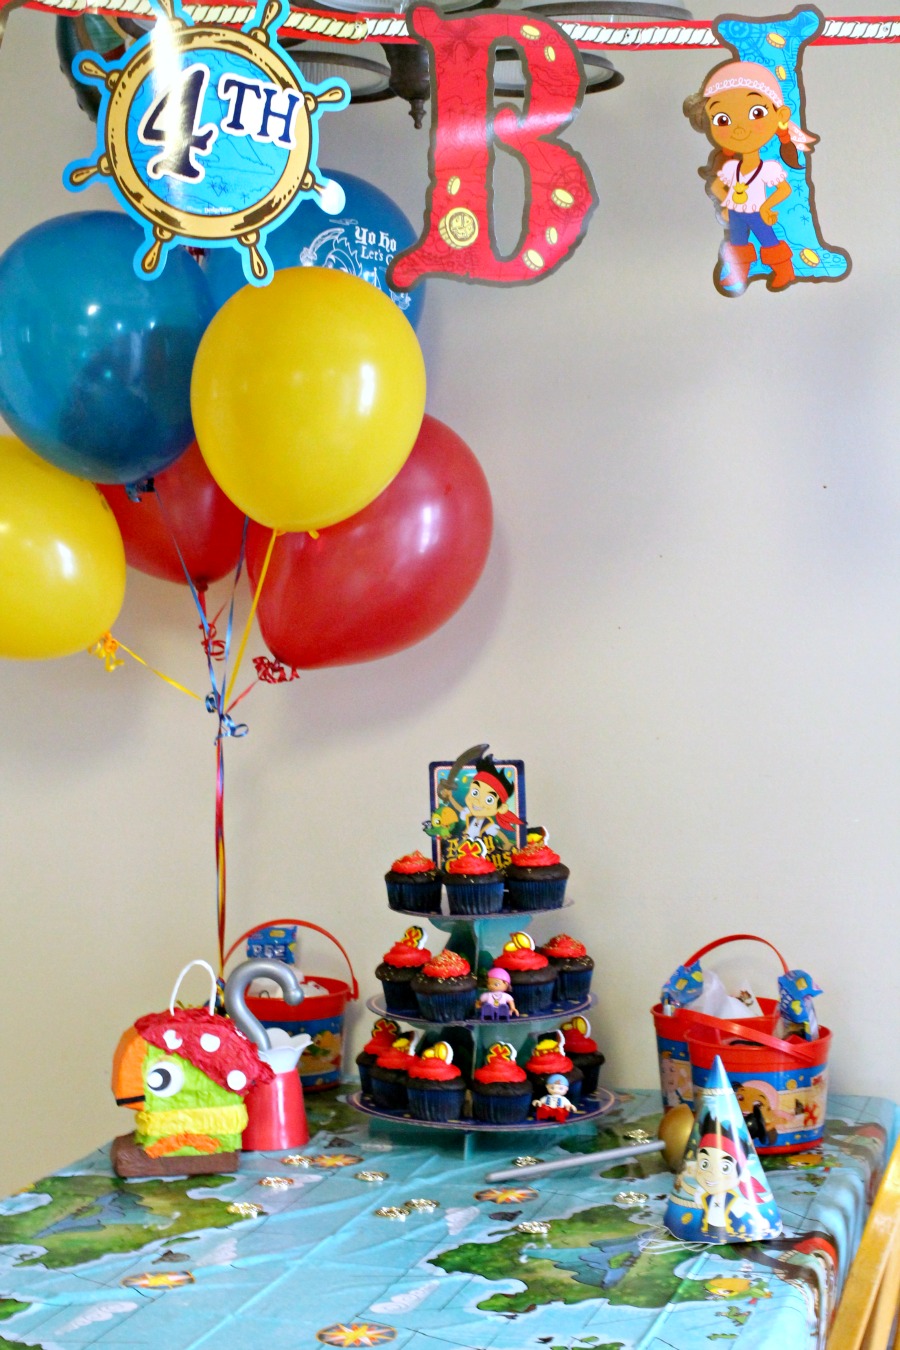 Frugal Foodie Mama: Throwing a Jake and the Neverland Pirates Birthday Party